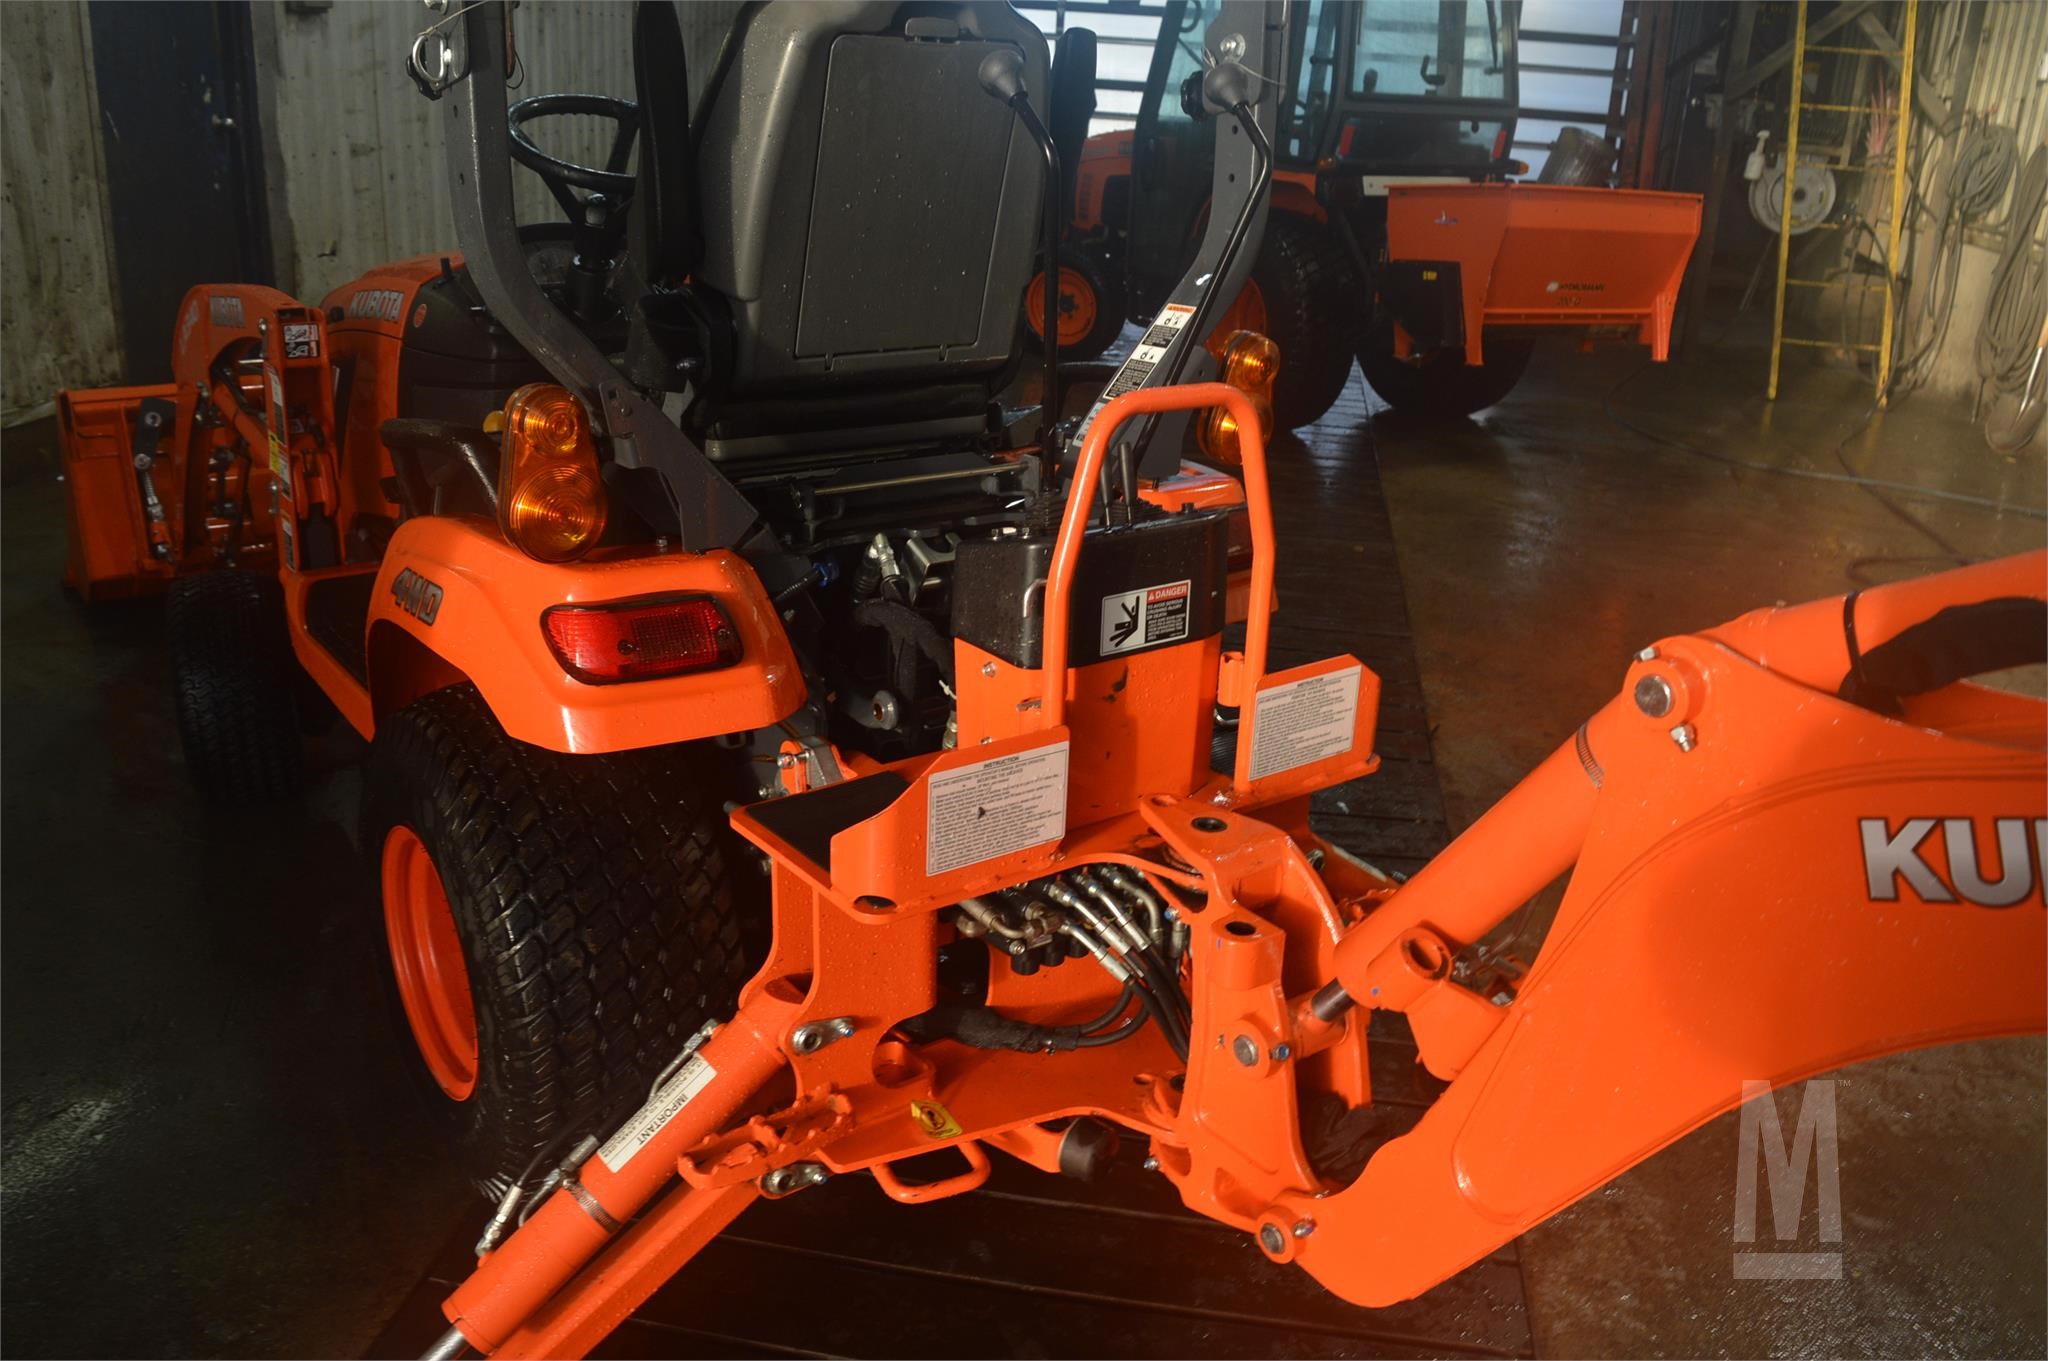 2017 Kubota Bx23s For Sale In Dungannon Ontario Canada Marketbookca